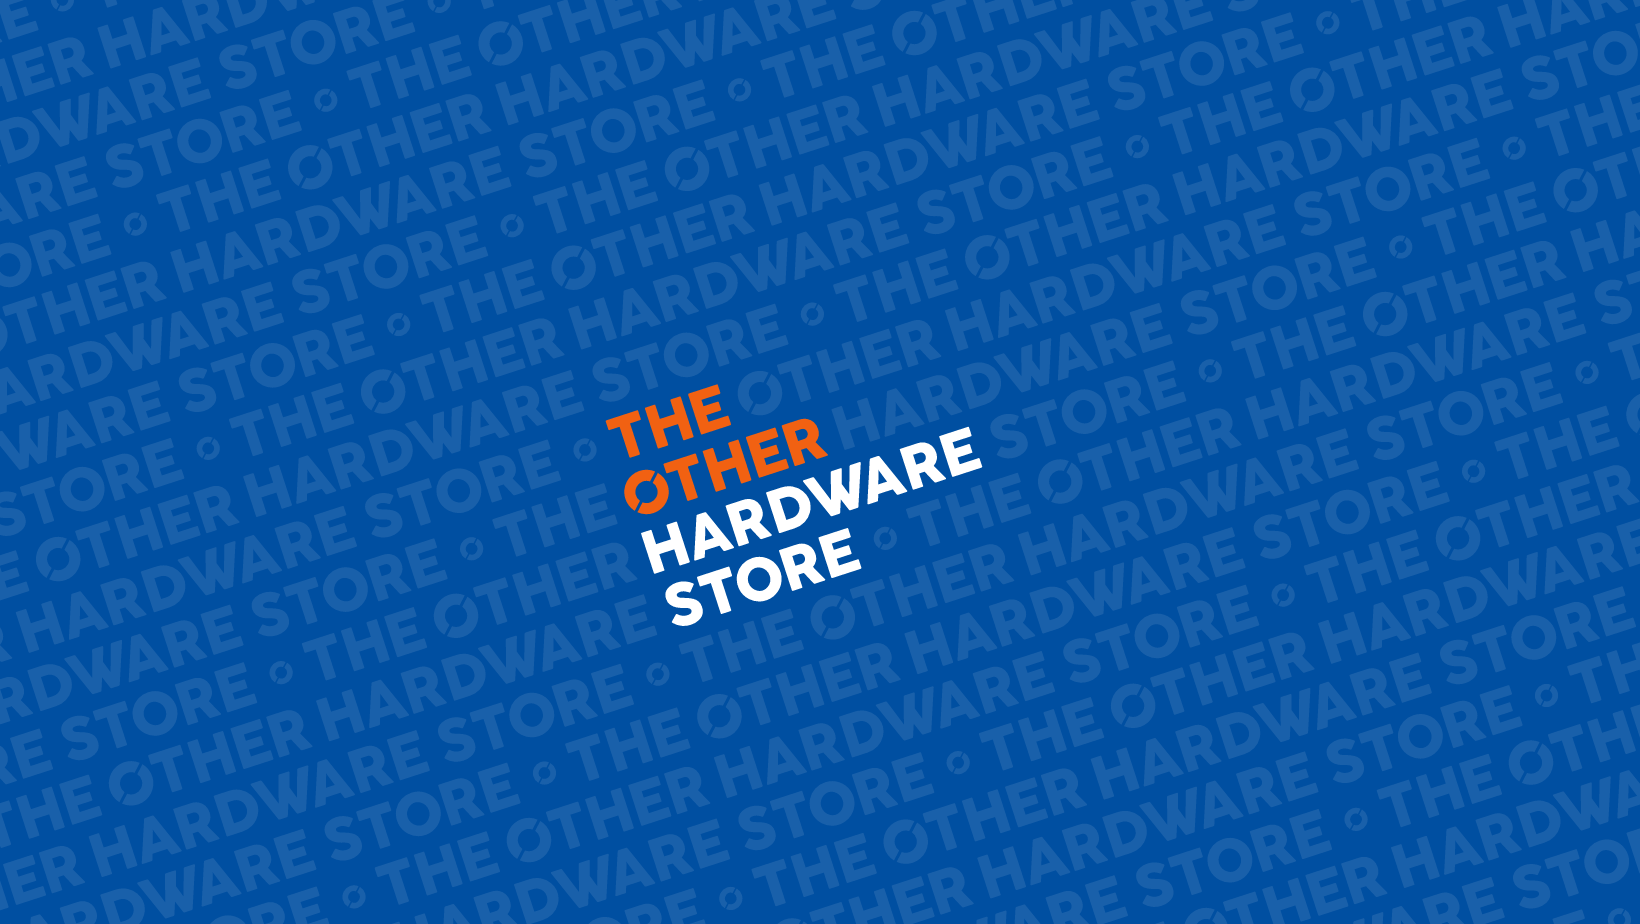 Find All Current Promotions from Mitre 10 in one page!